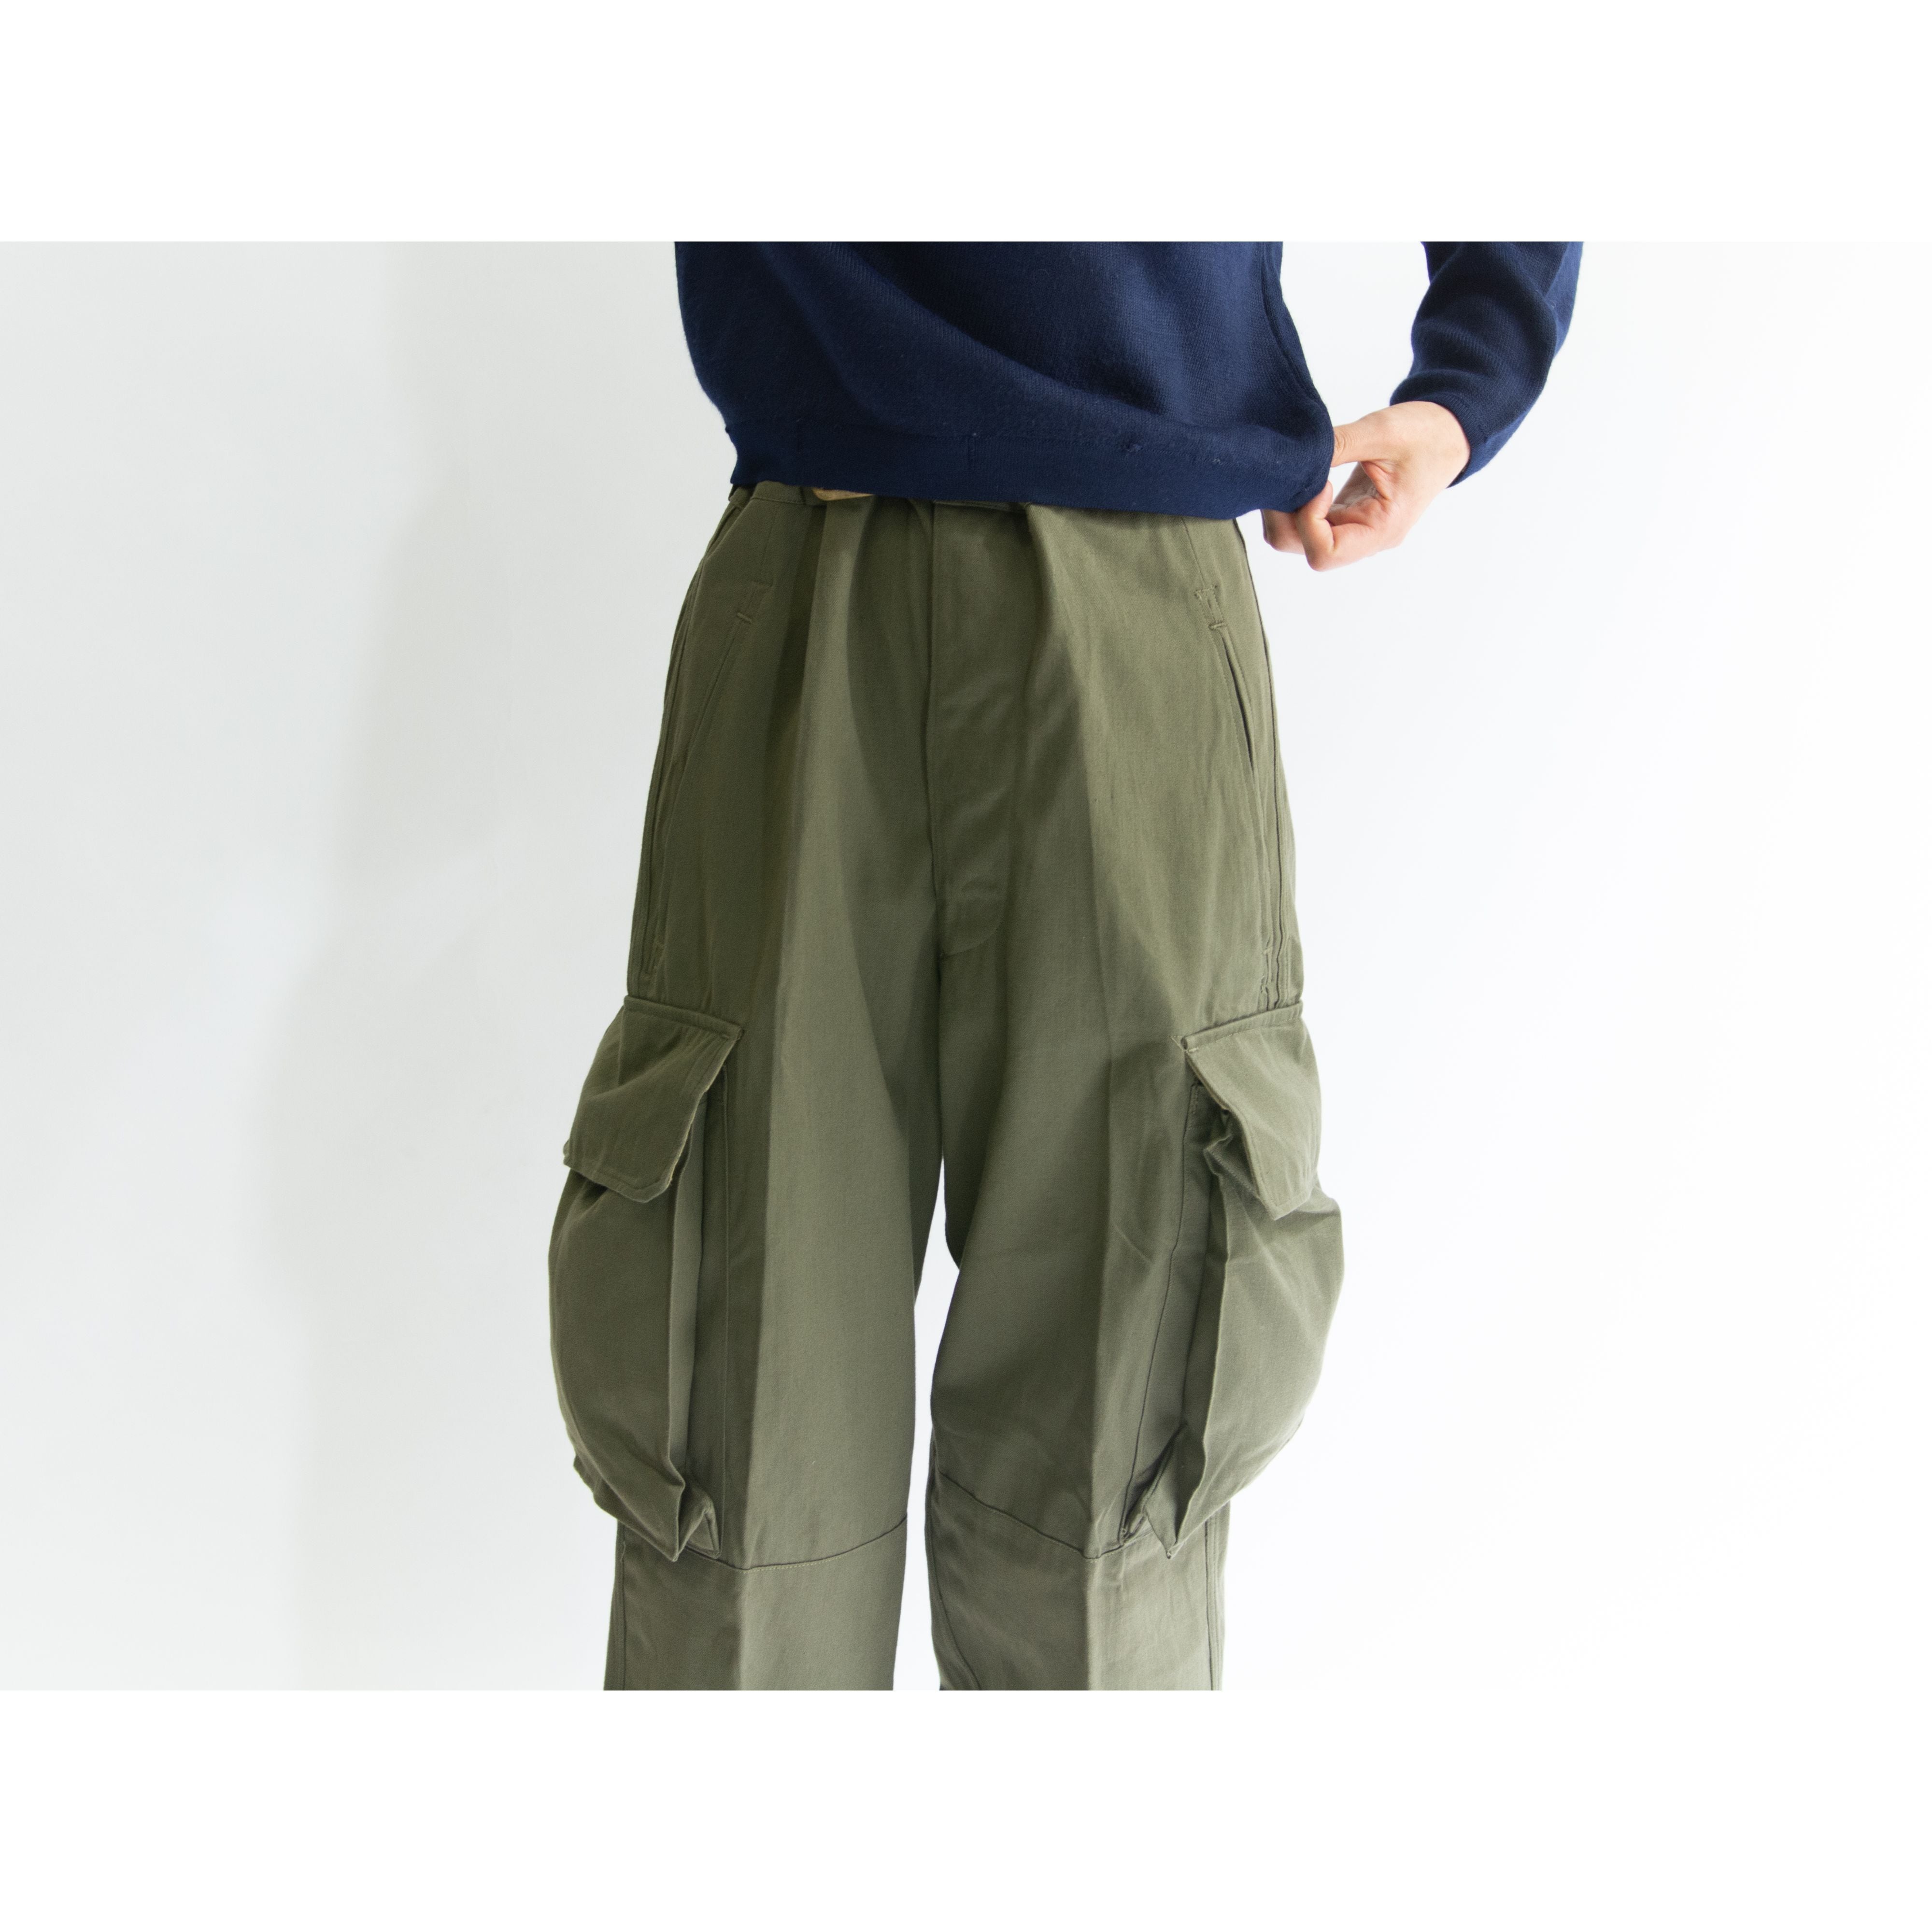 Dead stockFrench army M HBT cargo pantsデッドストック